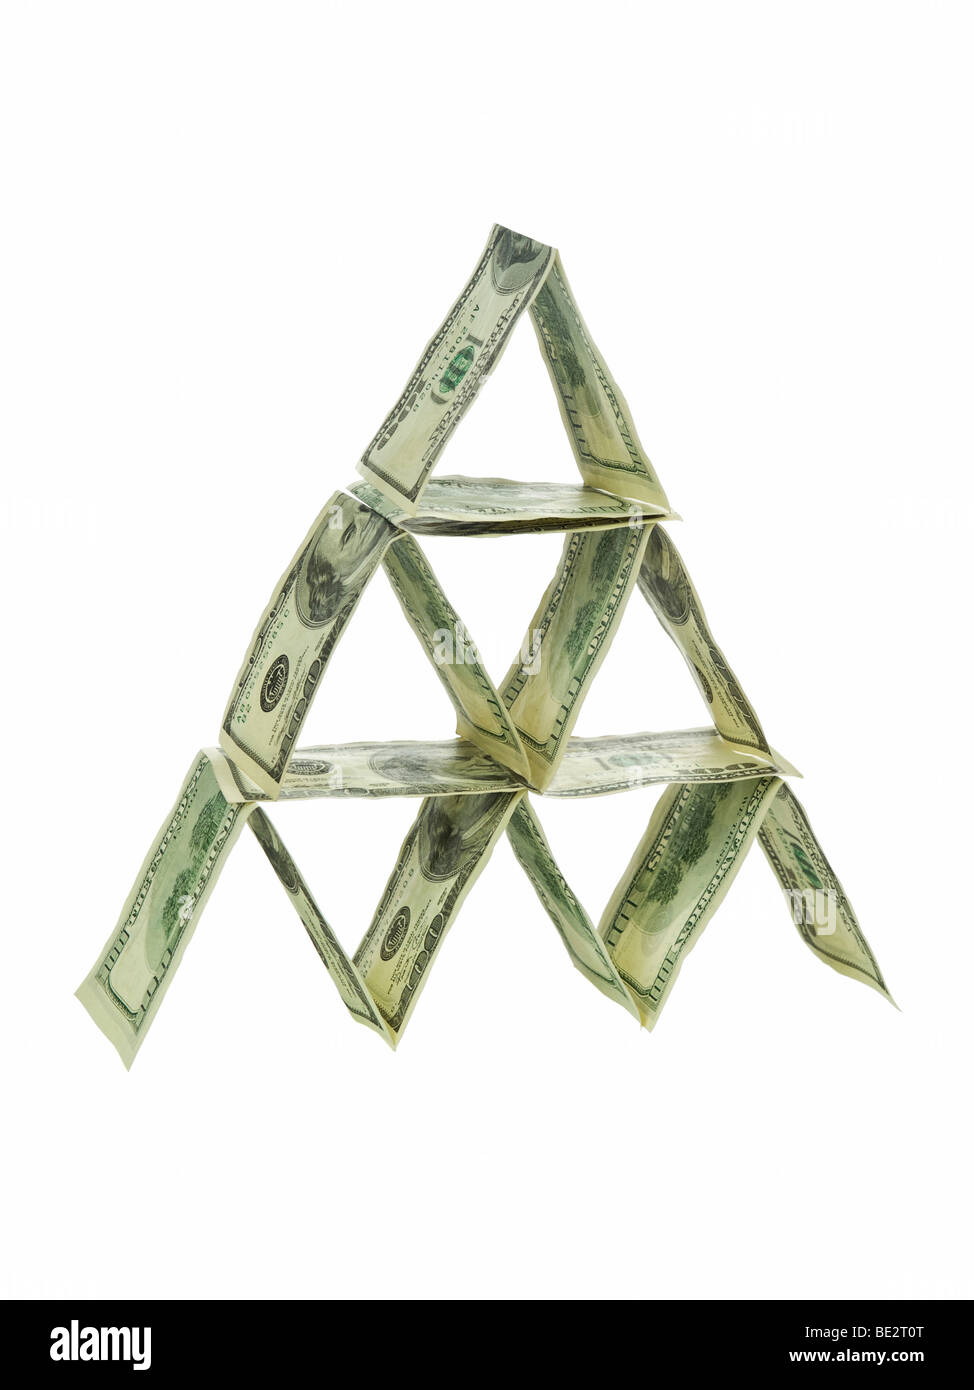 A pyramid made out of one hundred dollar bills isolated on white. Stock Photo